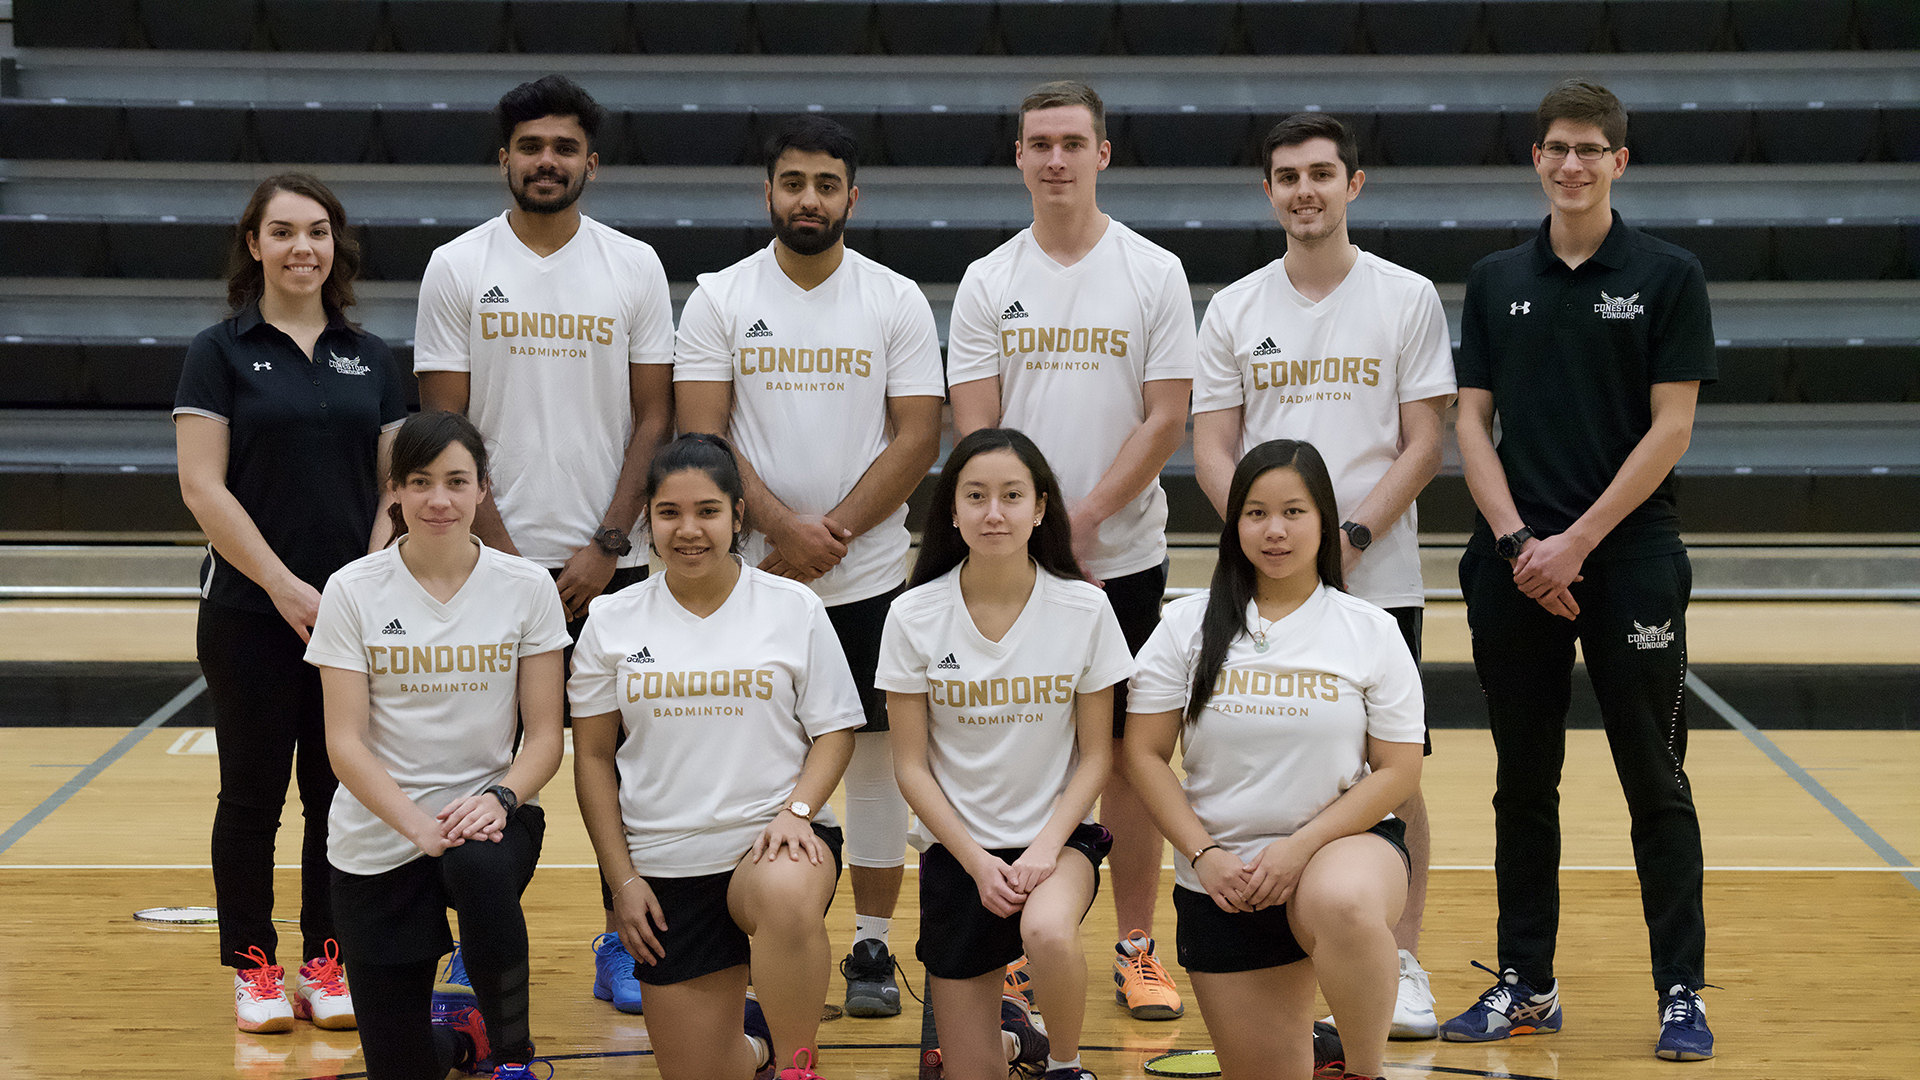 Badminton is recruiting for the 2022-2023 Season!